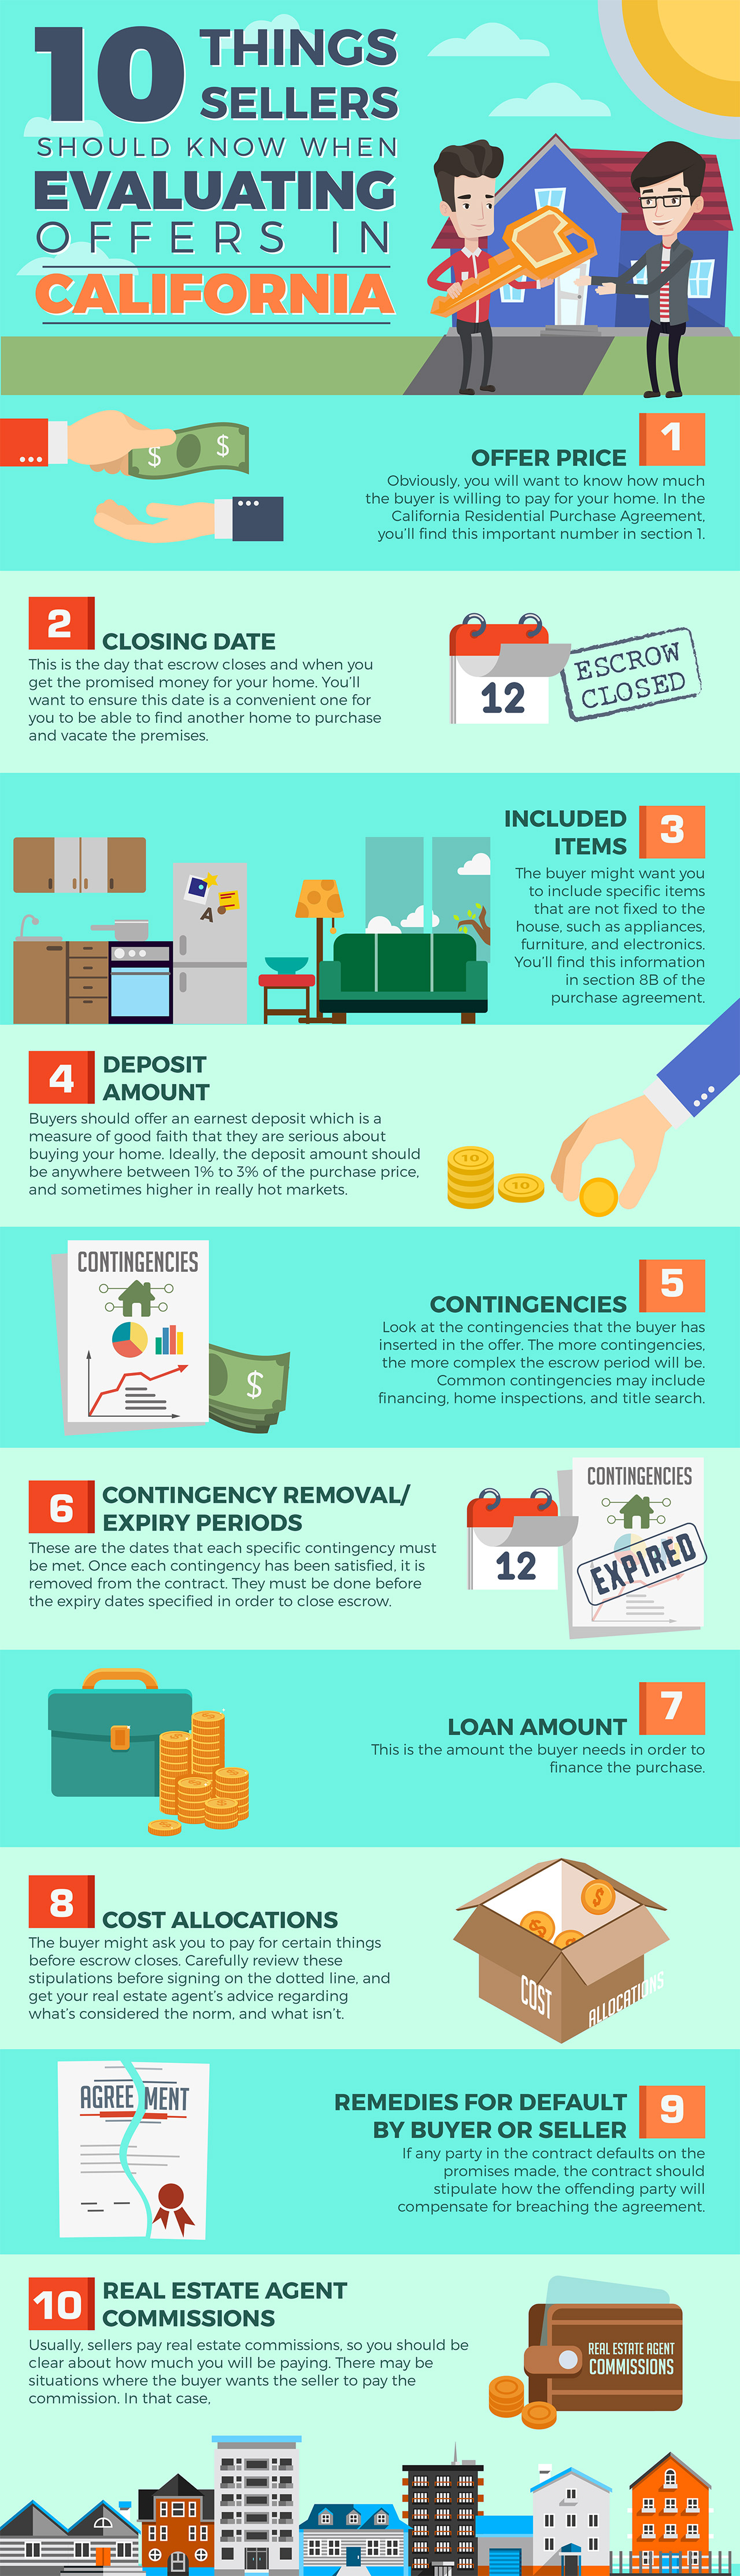 10-things-sellers-should-know-when-evaluating-offers-in-california-infographic